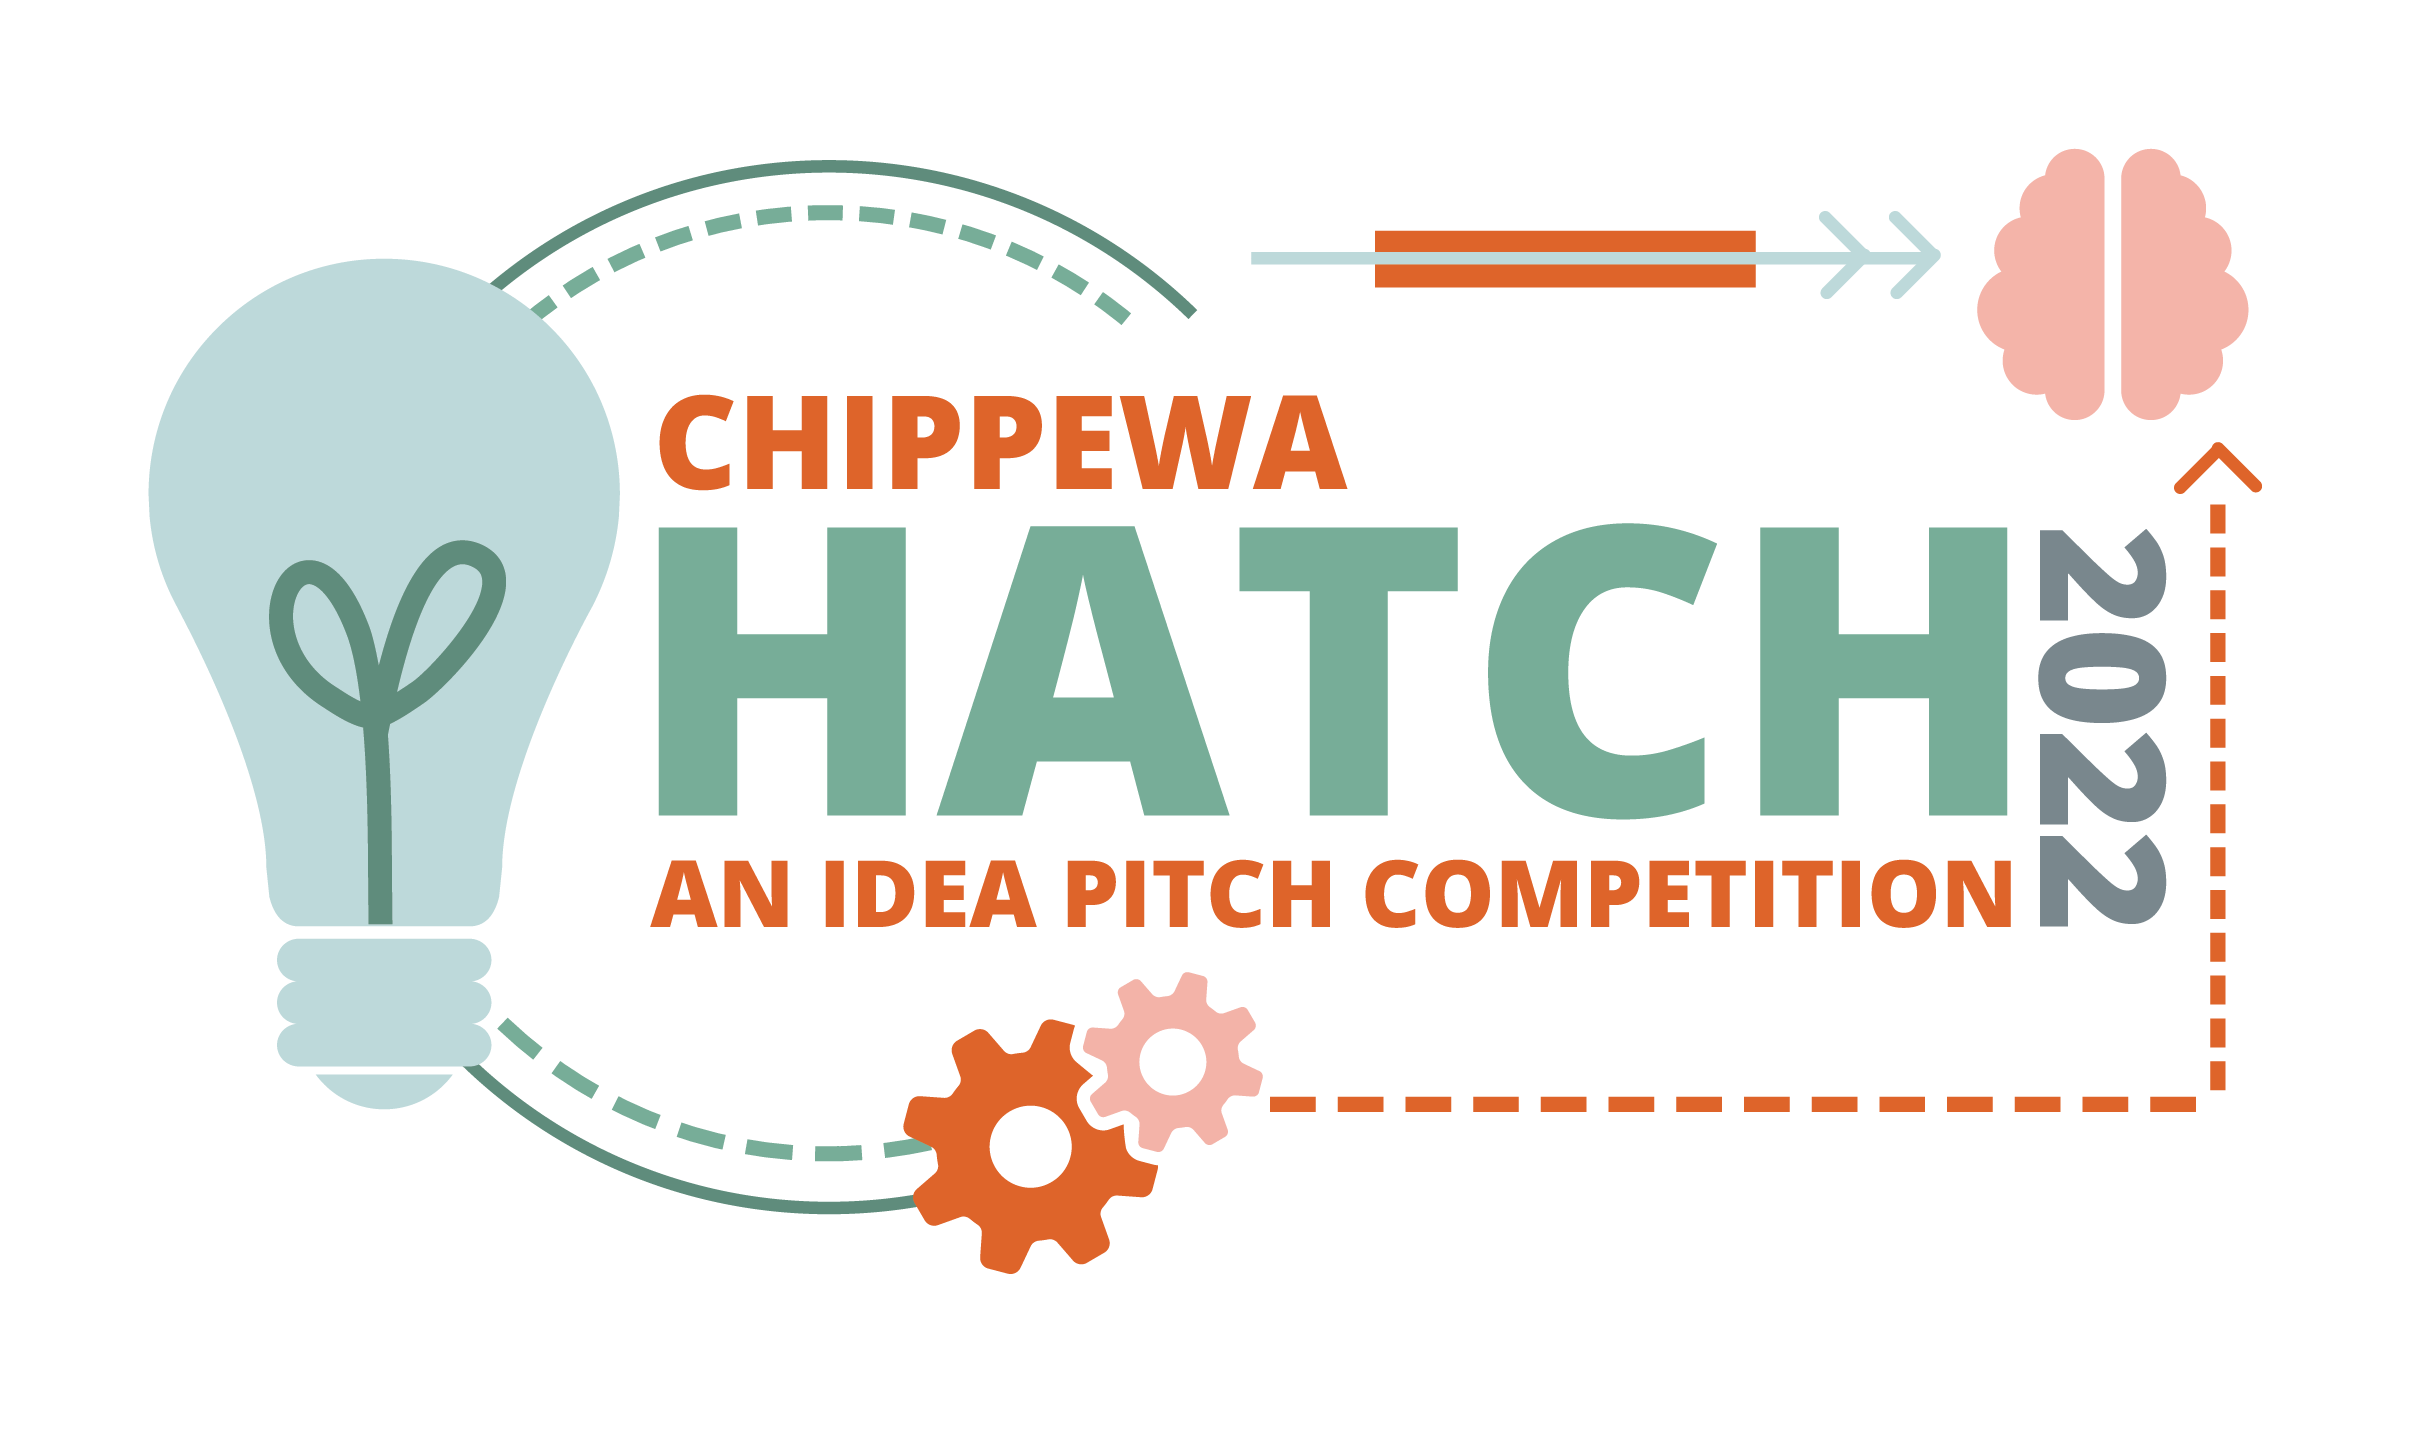 Wisconsin’s Elite Entrepreneurial Event - 2022 HATCH Business Pitch Competition Taking Place On November 16th in Eau Claire